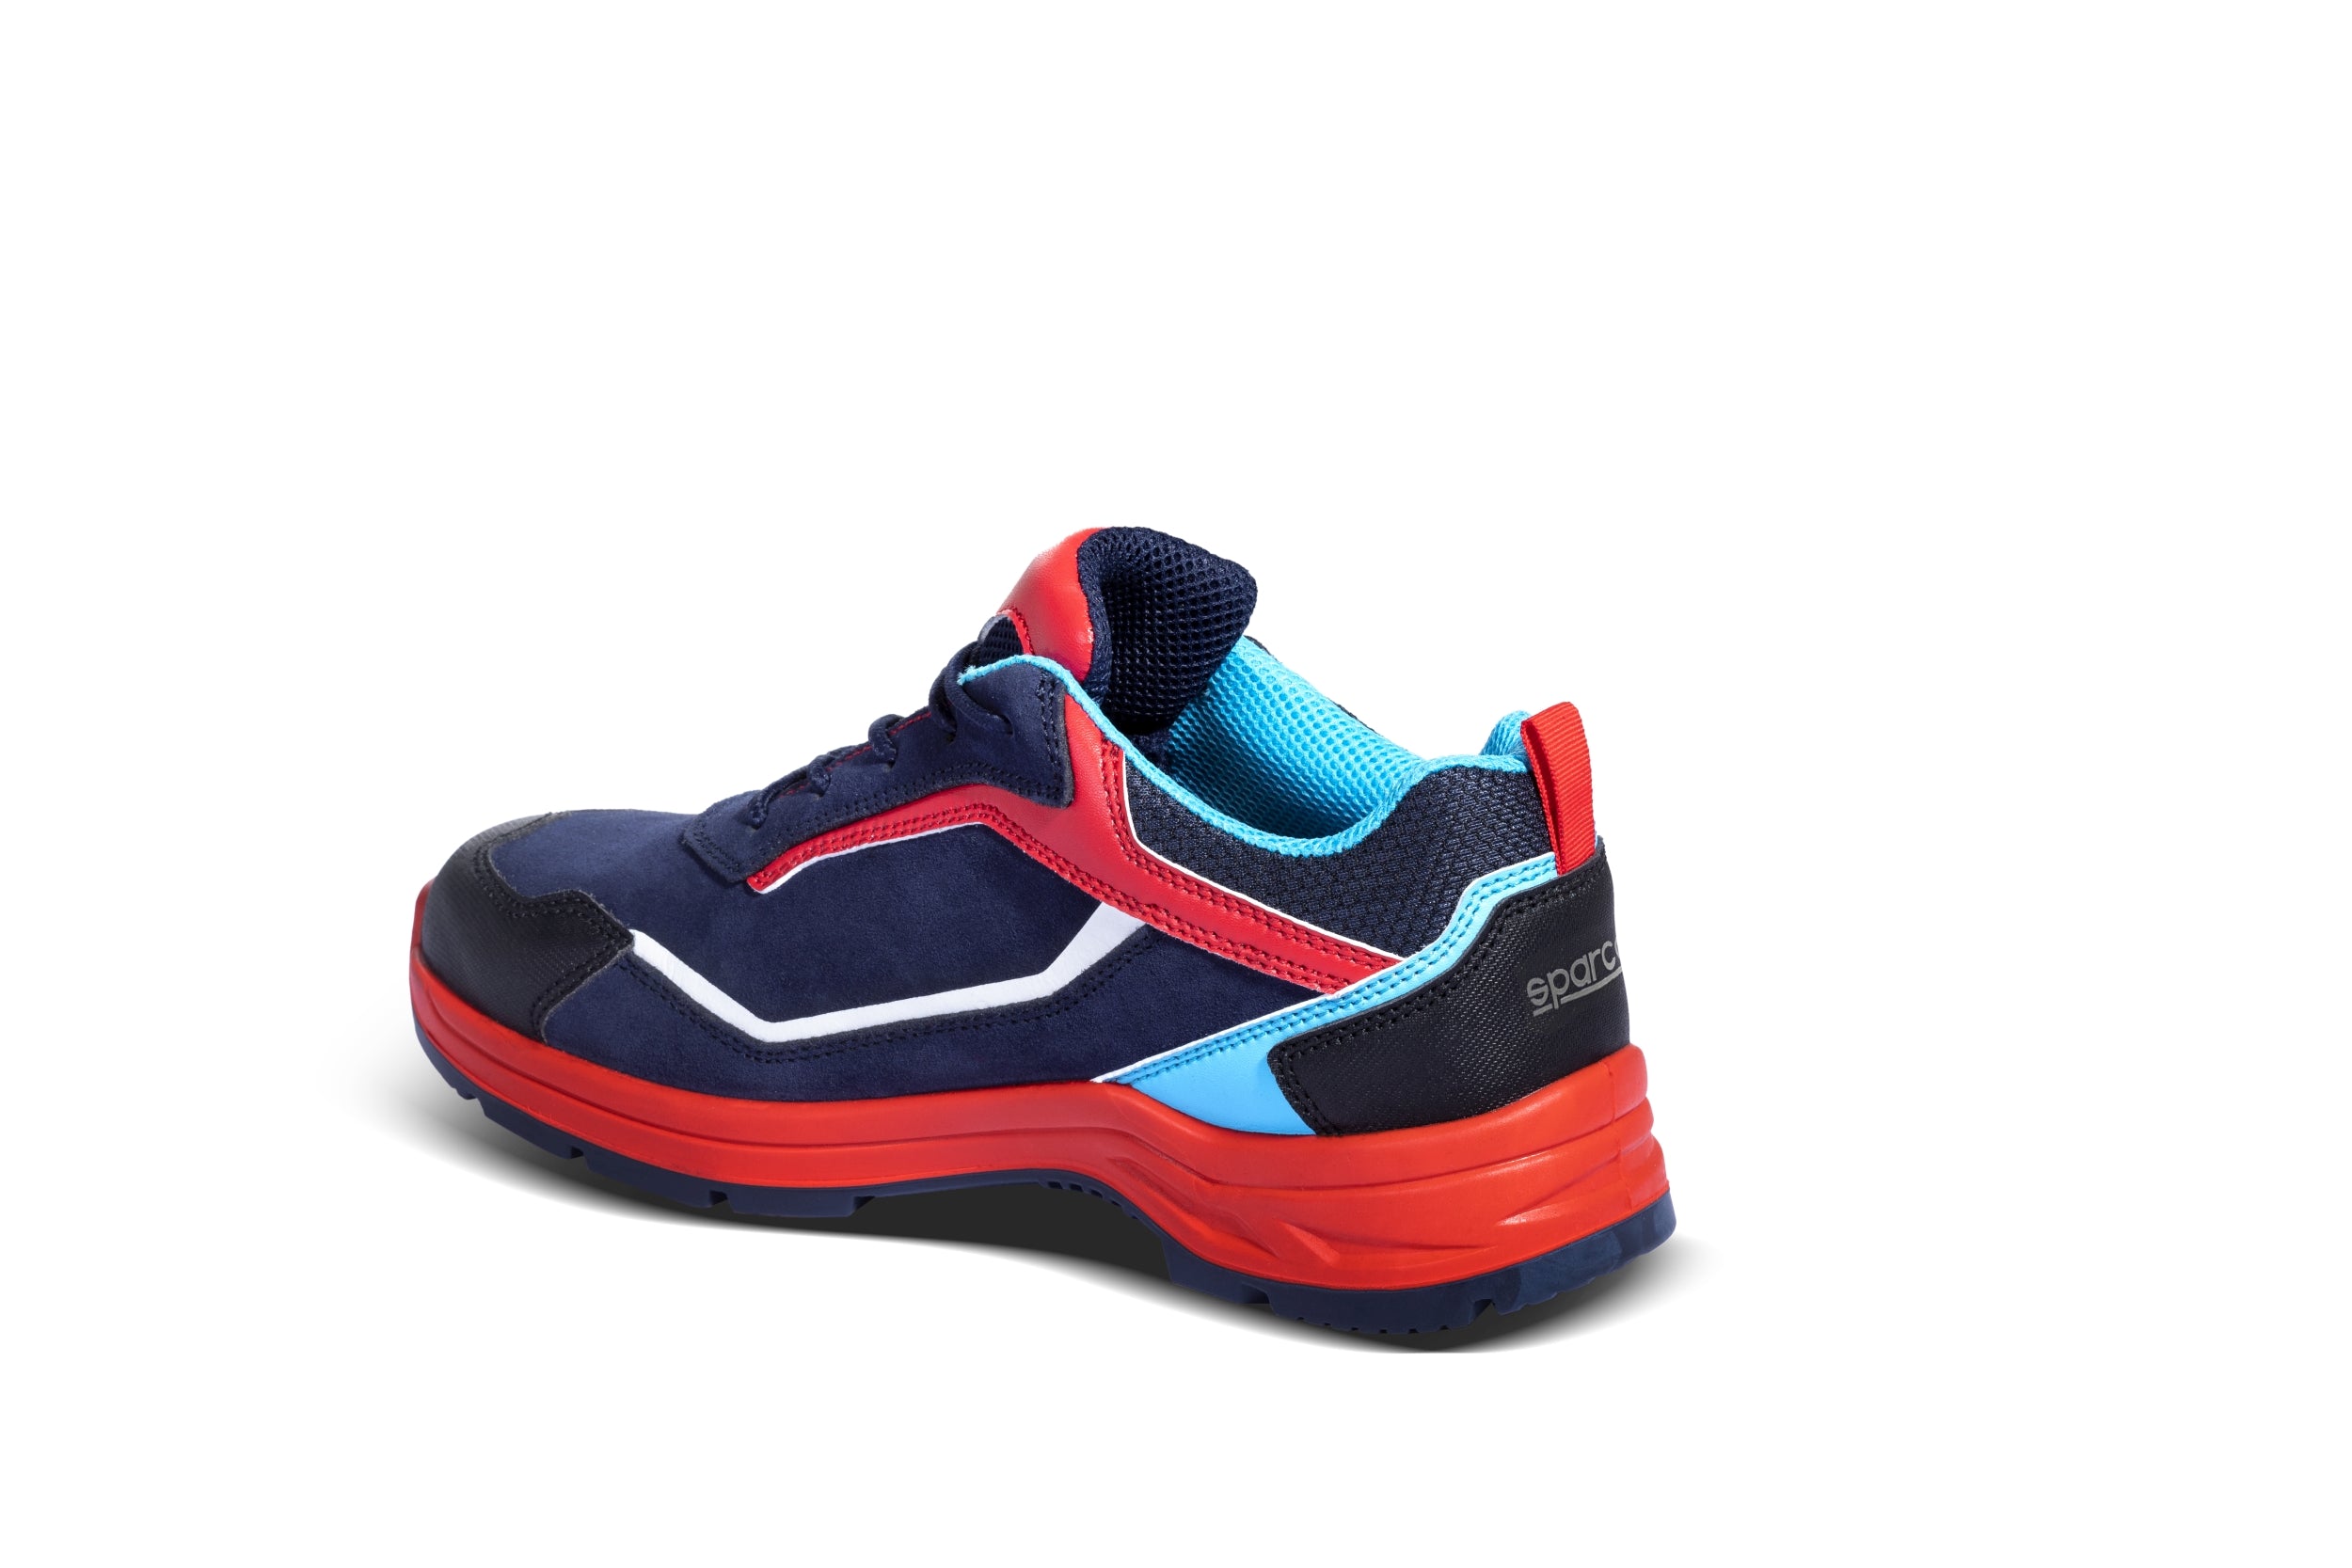 SPARCO 07537MR40BMRS Indy ESD S3 MARTINI RACING Shoes, navy blue/red, size 40 Photo-1 